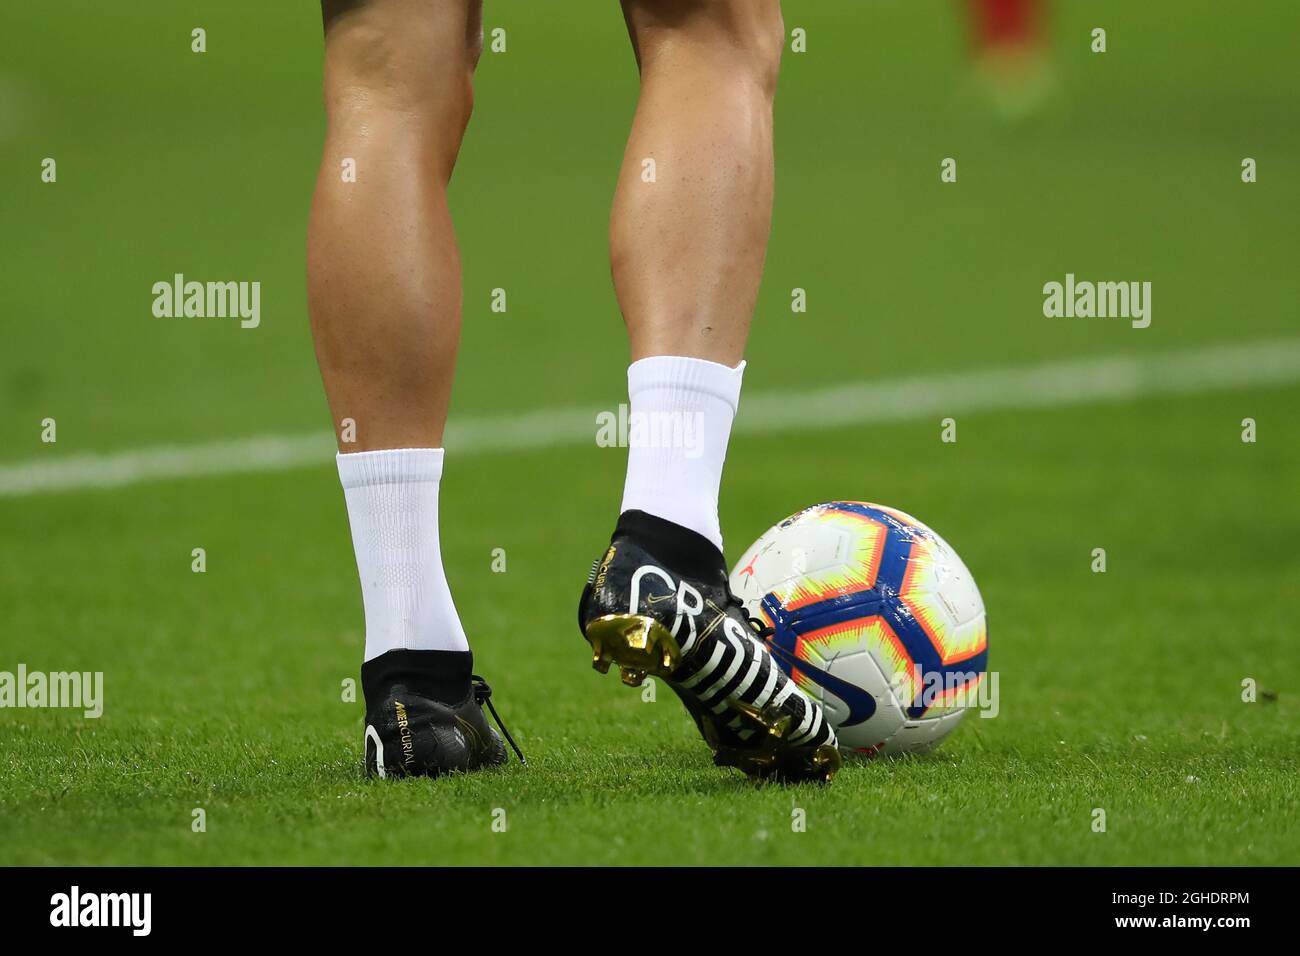 Cristiano Ronaldo of Juventus' new nike boots during the Serie A match at  Giuseppe Meazza, Milan.